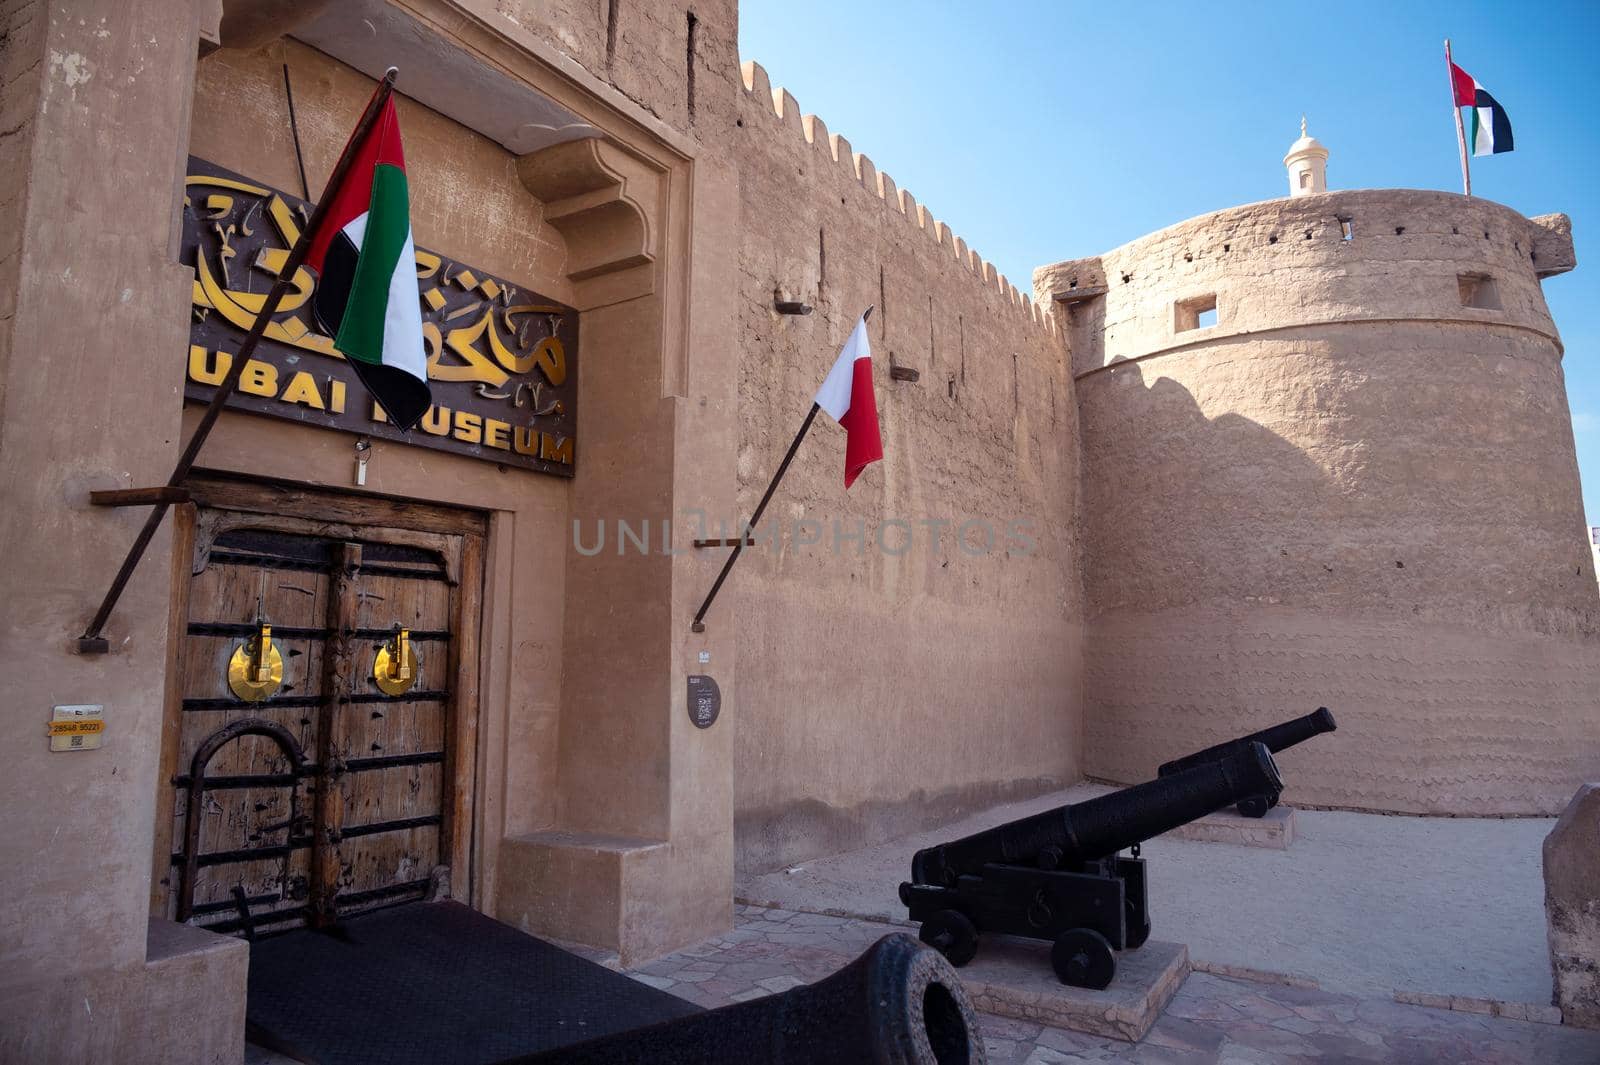 Feb 27th, 2021, Bur Dubai, UAE. View of the old Vintage door,canons and signboard at the entrance to the museum of Dubai UAE captured at Bur Dubai, UAE. by sriyapixels